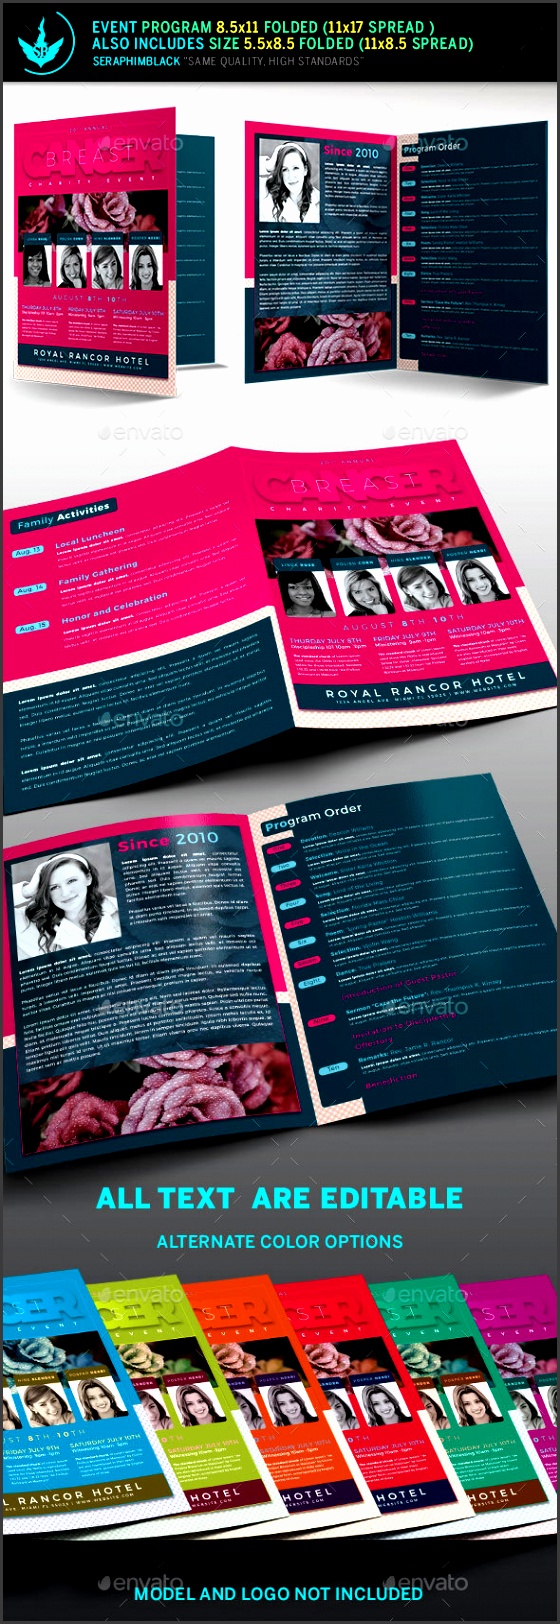 breast cancer charity event program template